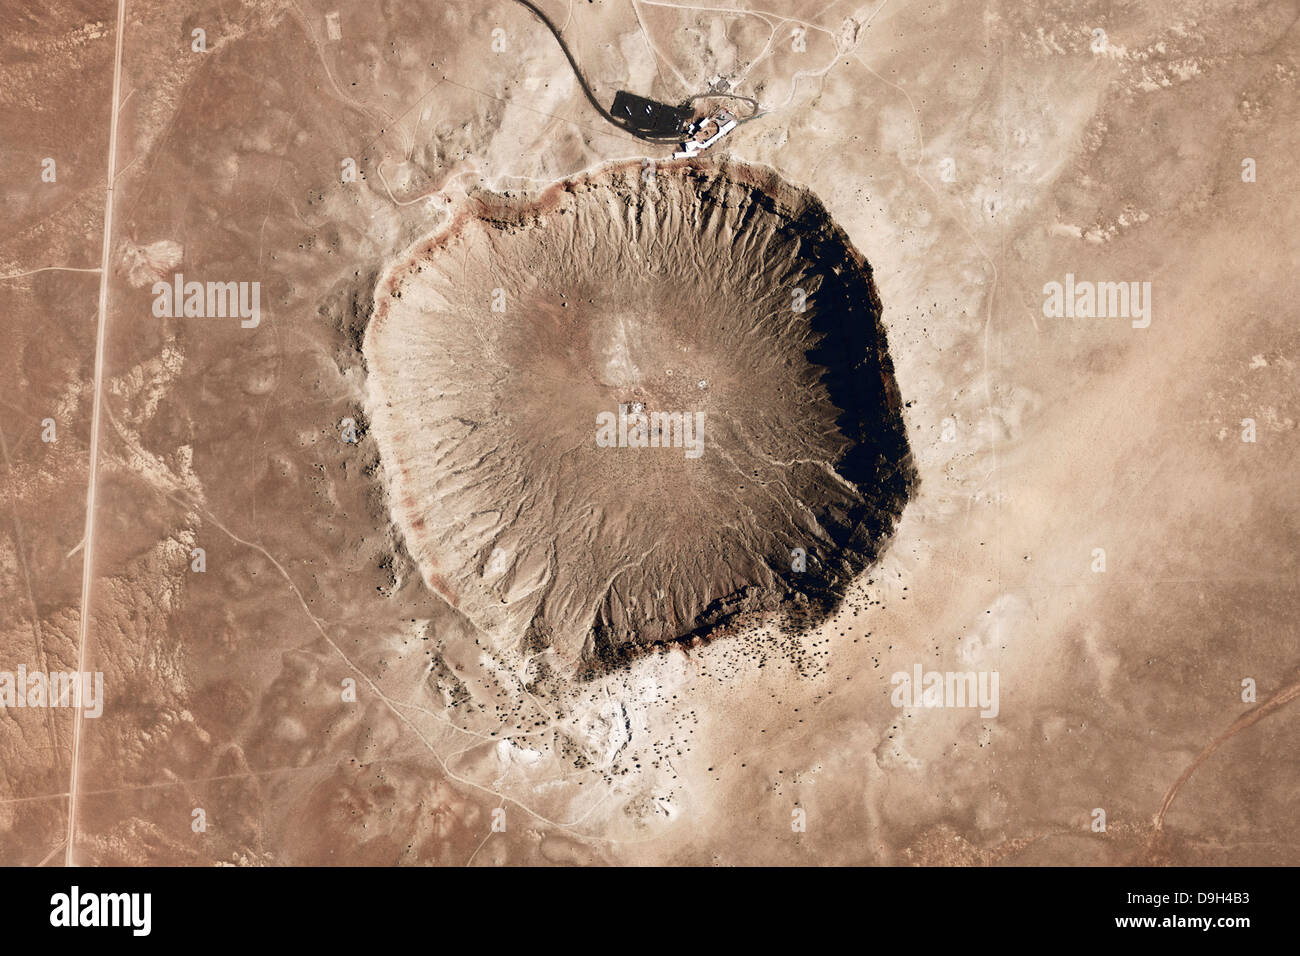 A meteorite impact crater in the northern Arizona desert of the United States. Stock Photo